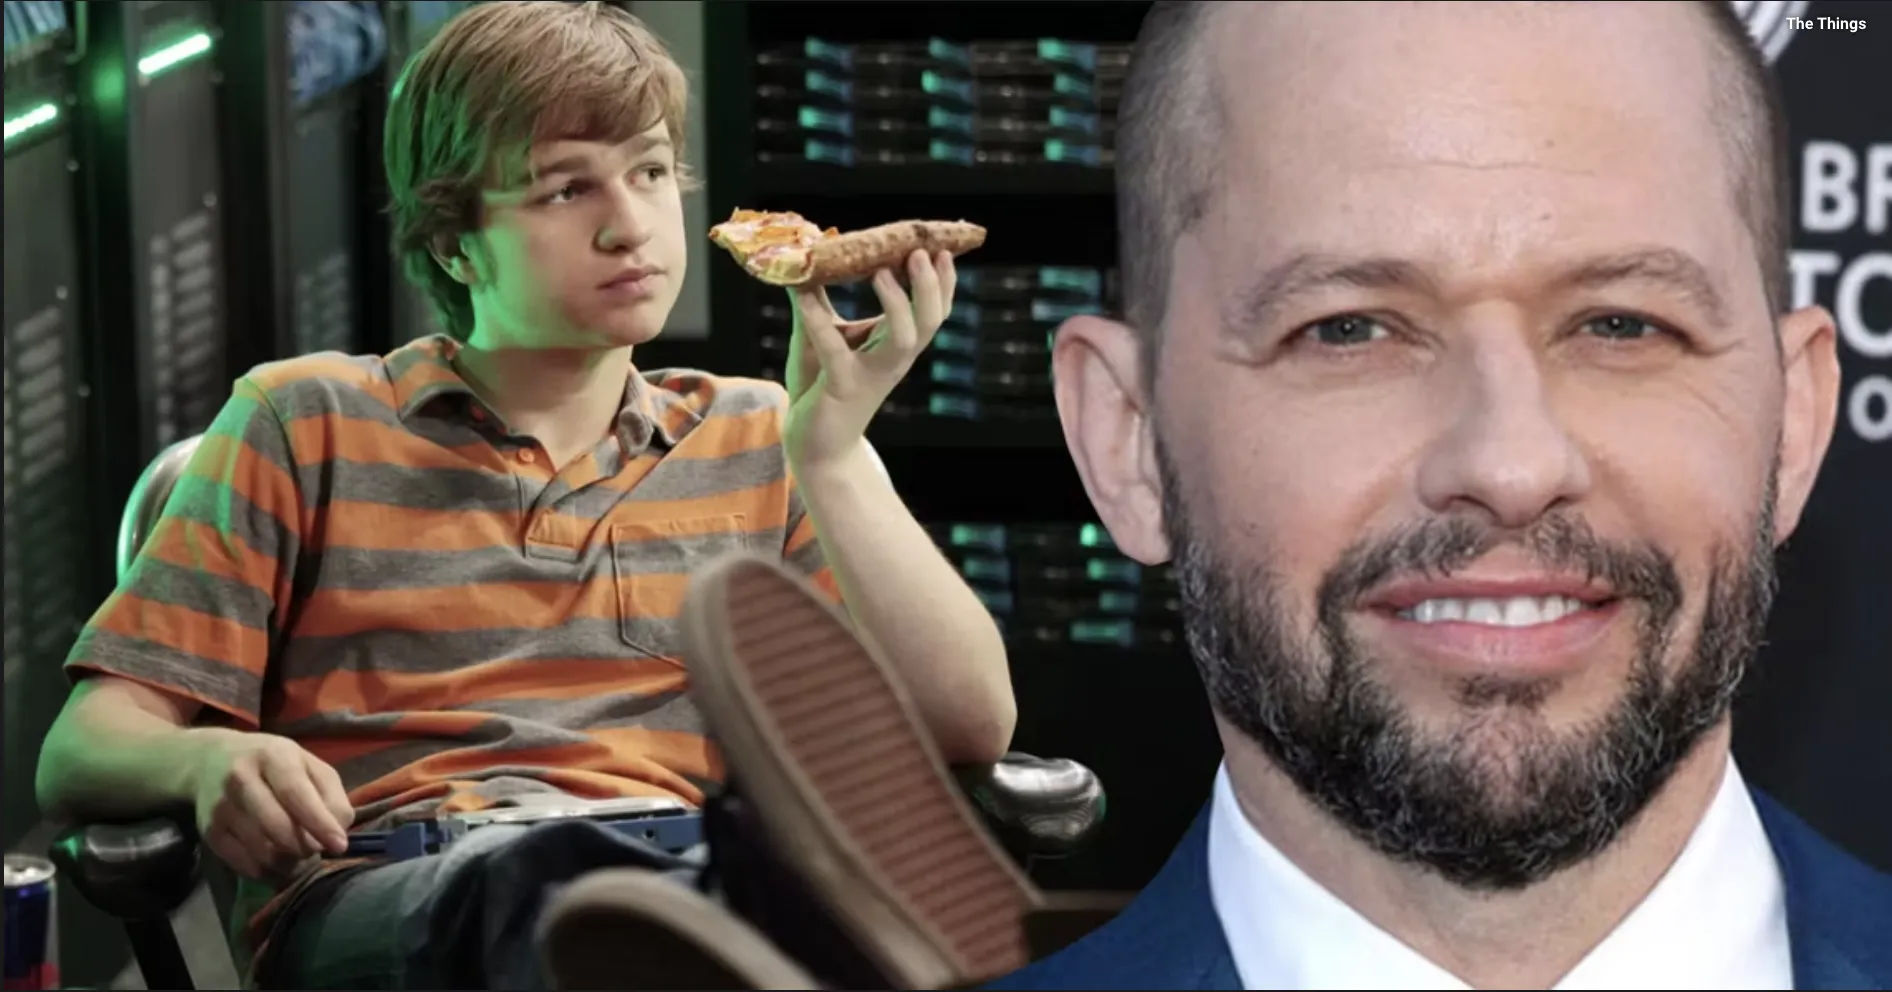 Jon Cryer And Charlie Sheen Had Opposite Reactions To Angus T. Jones' Meltdown During Two And A Half Men